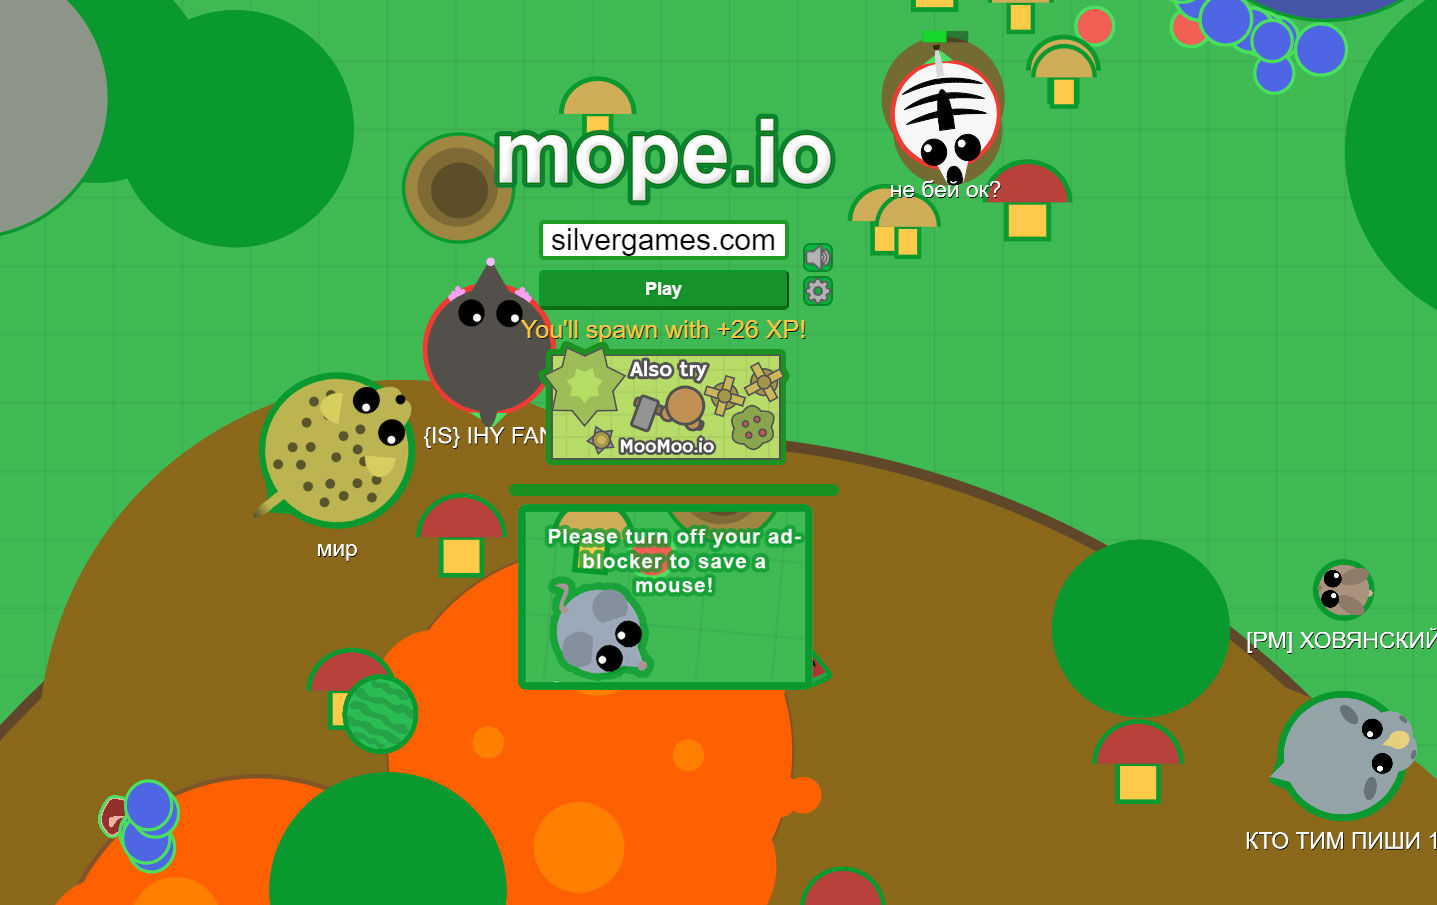 Play Mope.io  Free Online Games. KidzSearch.com